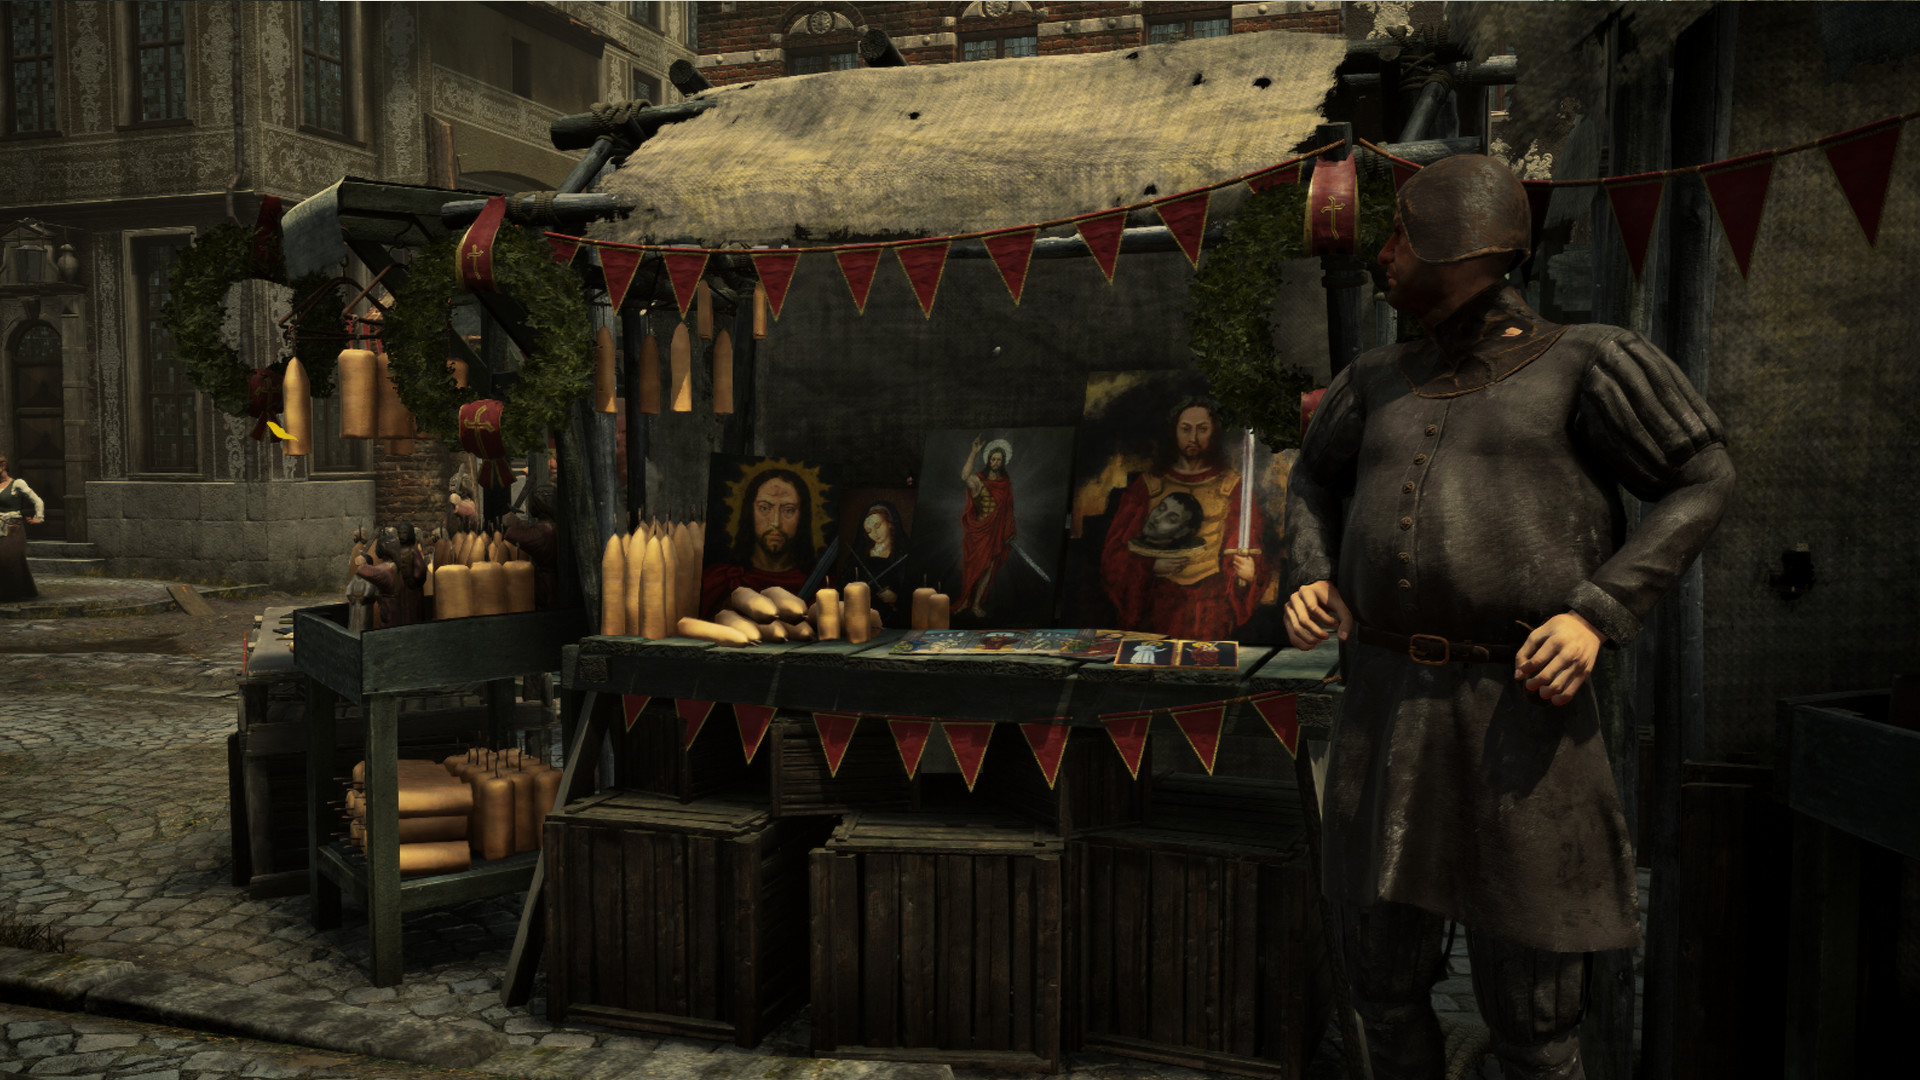 Portly guard in leather jerkin stands in front of stall showing icons of an unsettling alternate Christ.